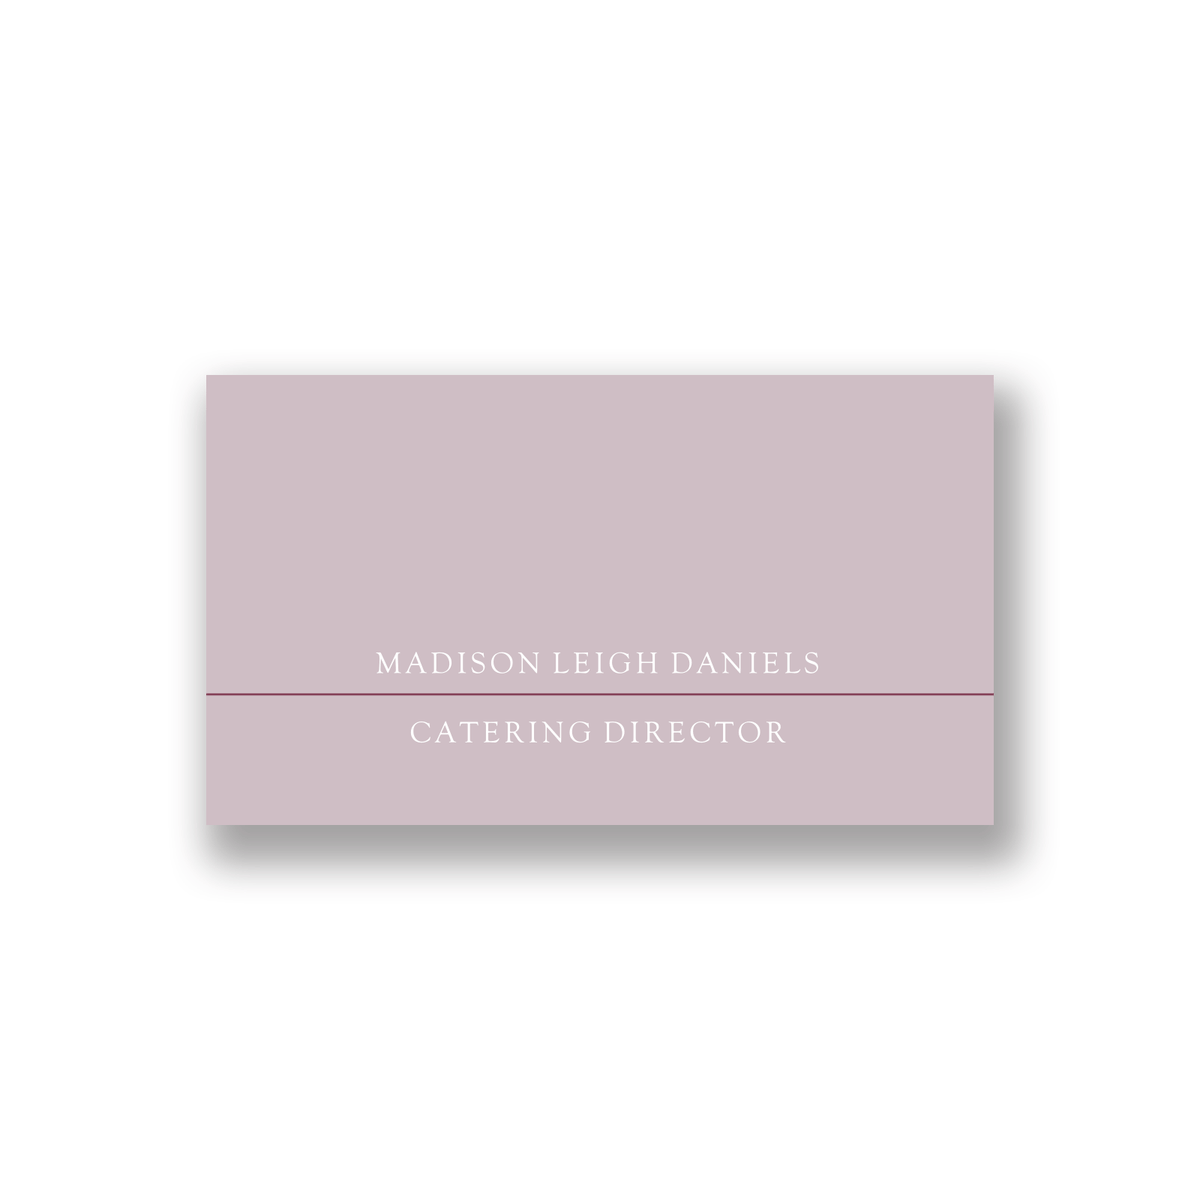 Rime Custom Business Cards Dusty Rose 99270 russell+hazel Business Cards